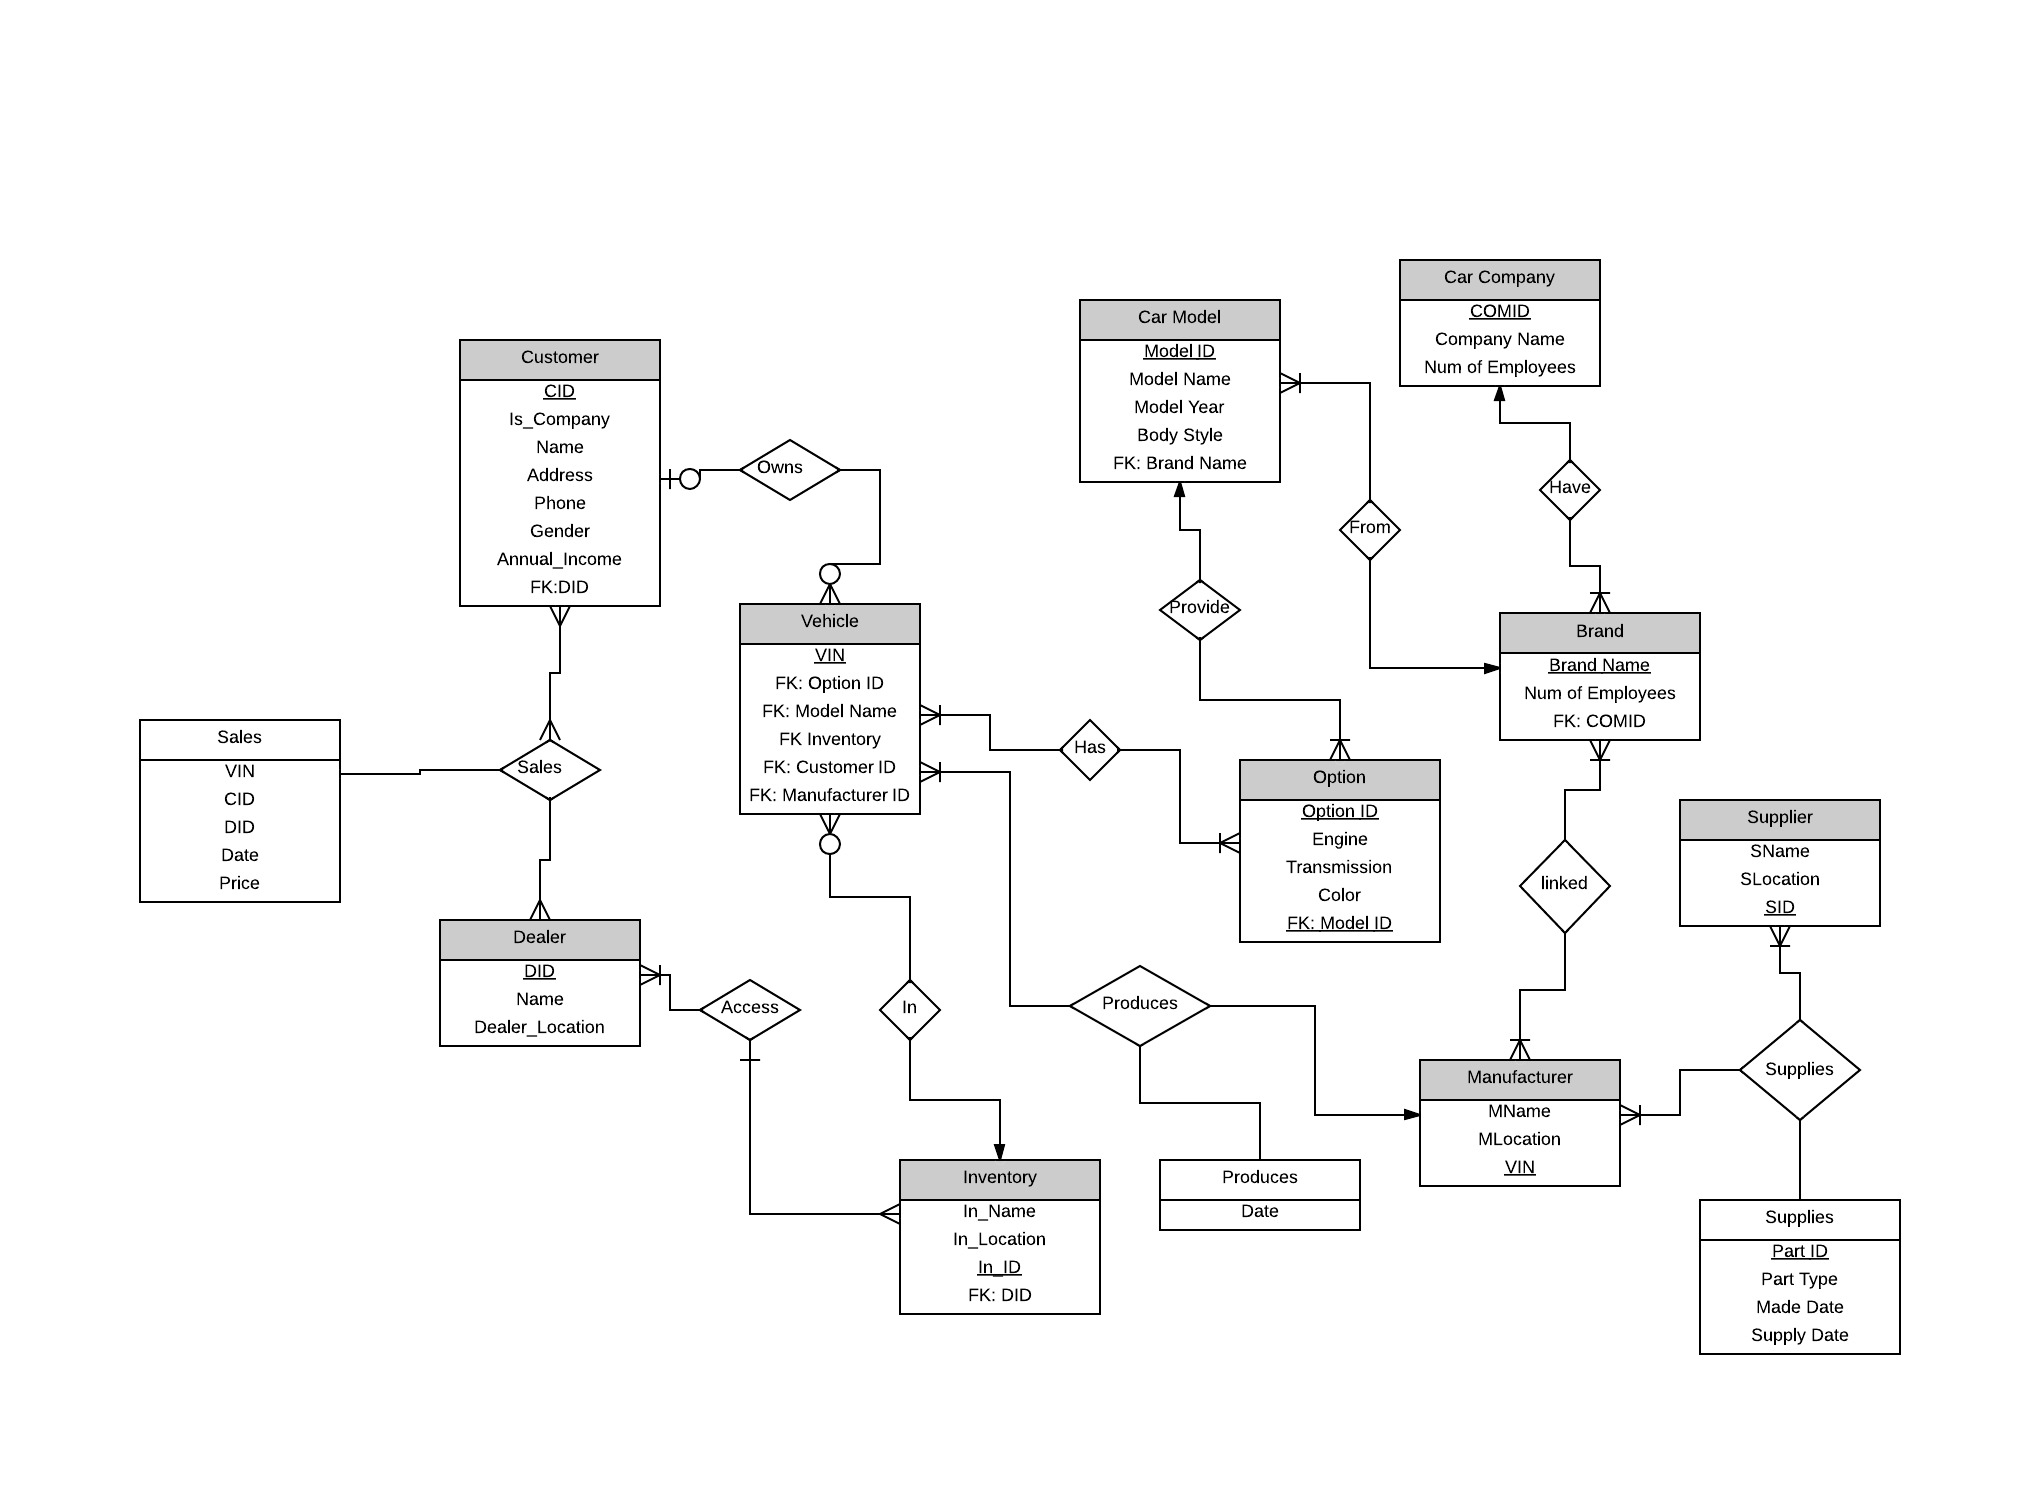 Need Help On An Er Diagram For An Automobile Company - Stack